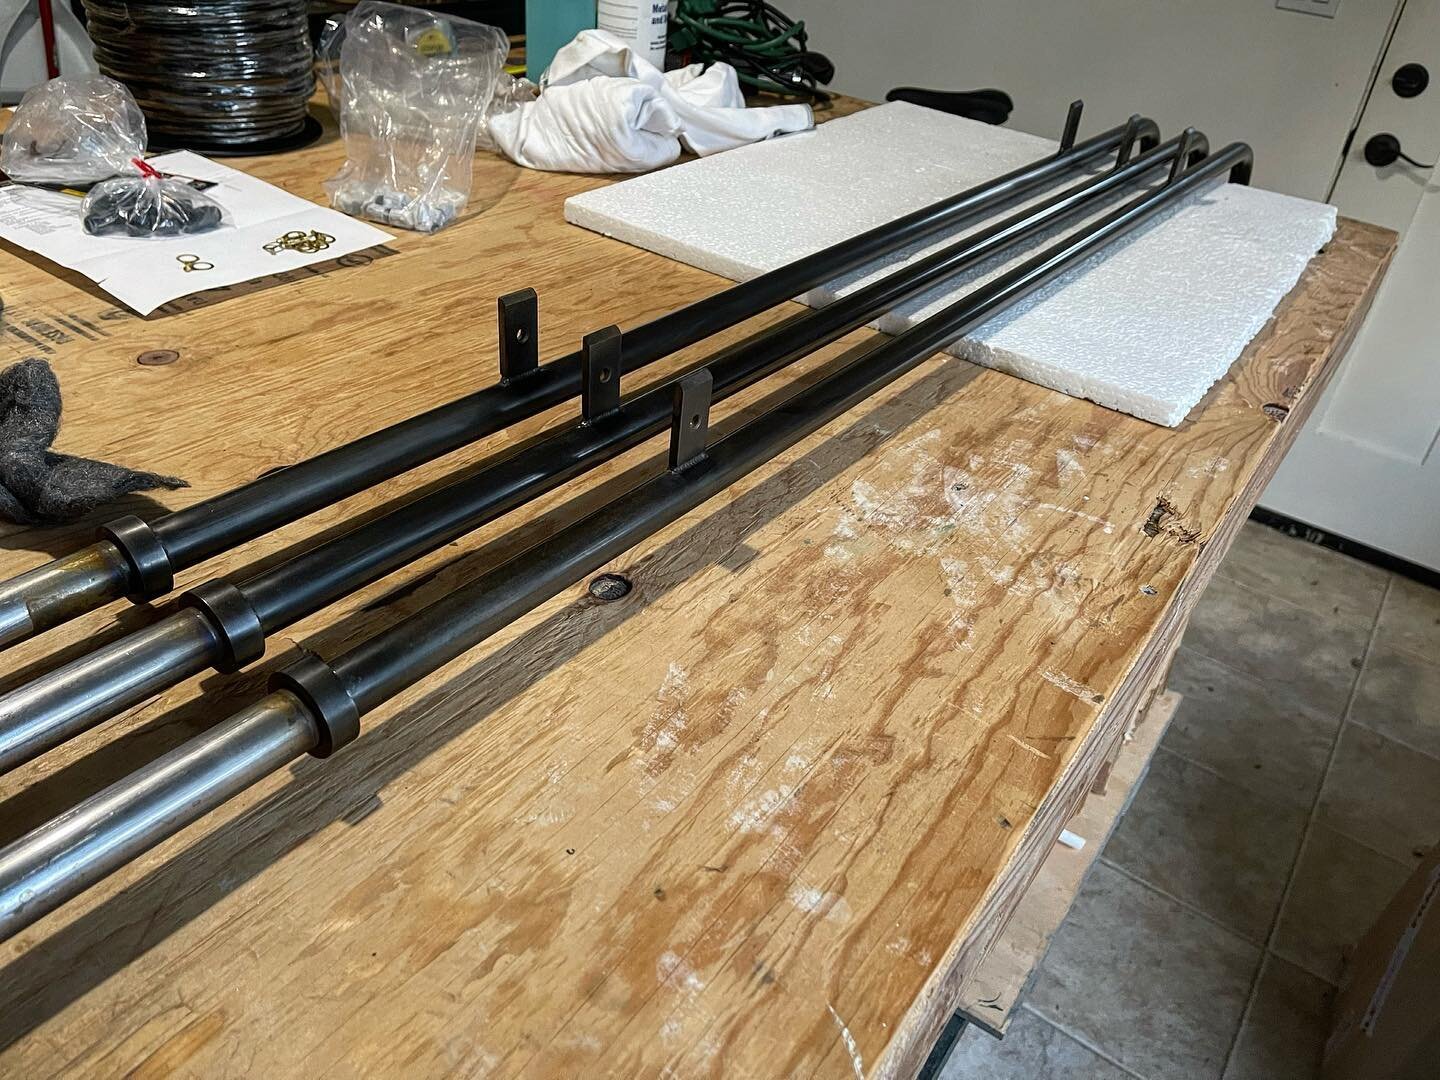 Progress UPDATE: Steel tubes and plates are done! ✔️ I&rsquo;m pretty proud of how they turned out and can&rsquo;t wait to delivery the completed fixtures to @studiounltd this weekend.  Scroll through to the last picture for a little tease 😉 It expl